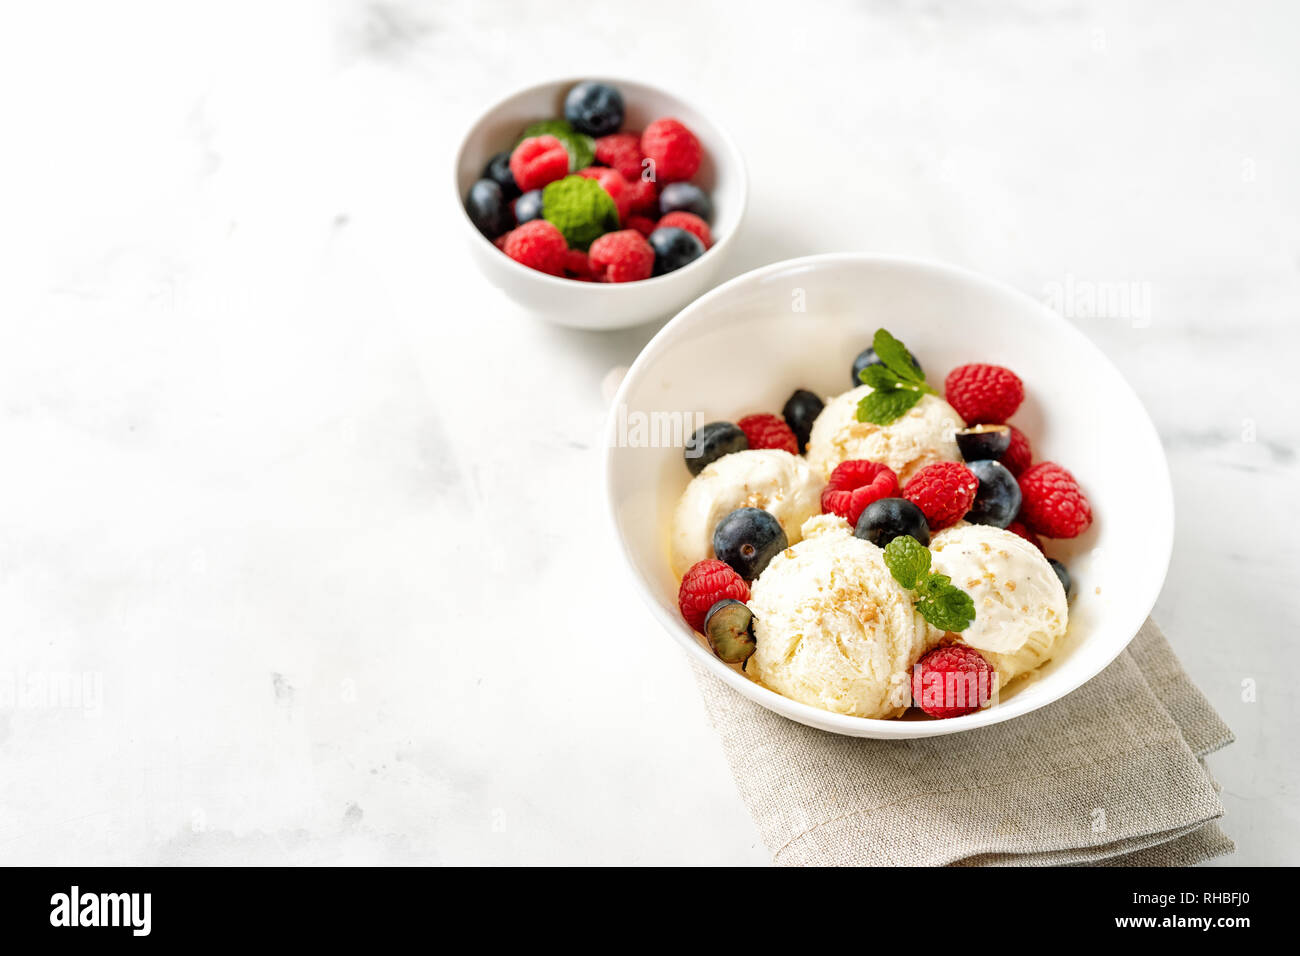 Vanilla ice cream balls in a bowl on hwite table with berries. Copy space Stock Photo